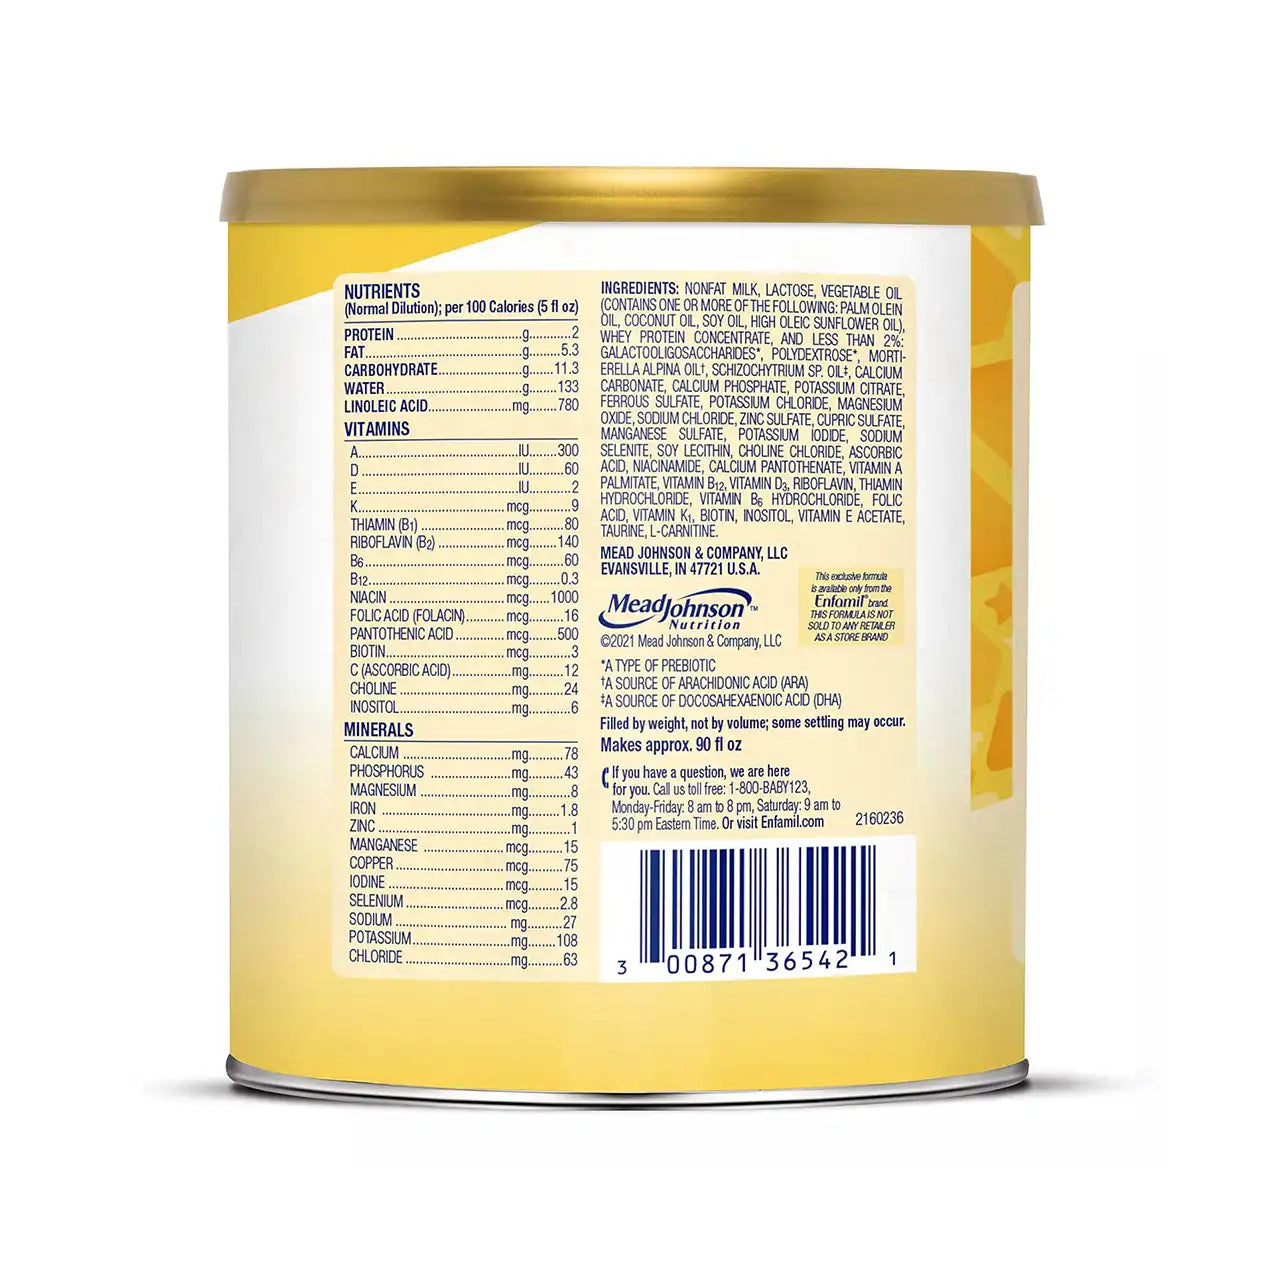 Enfamil Infant Baby Milk Formula with Iron - 354gms, 0-12months (Imported Tin Pack)